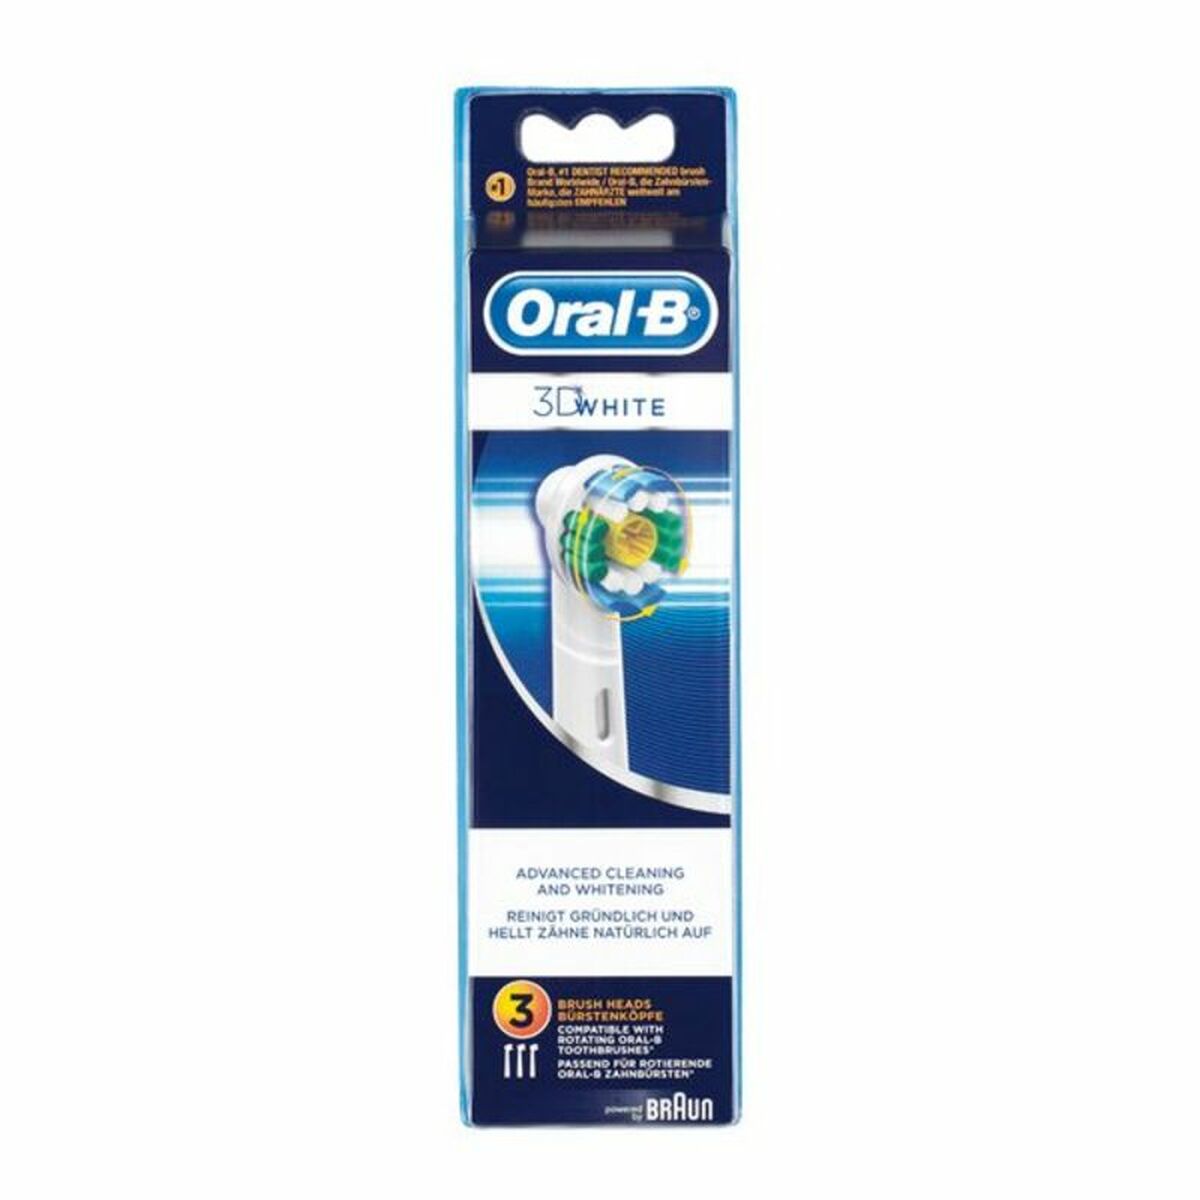 Spare for Electric Toothbrush Oral-B 80338474 (3 Units) - Calm Beauty IE